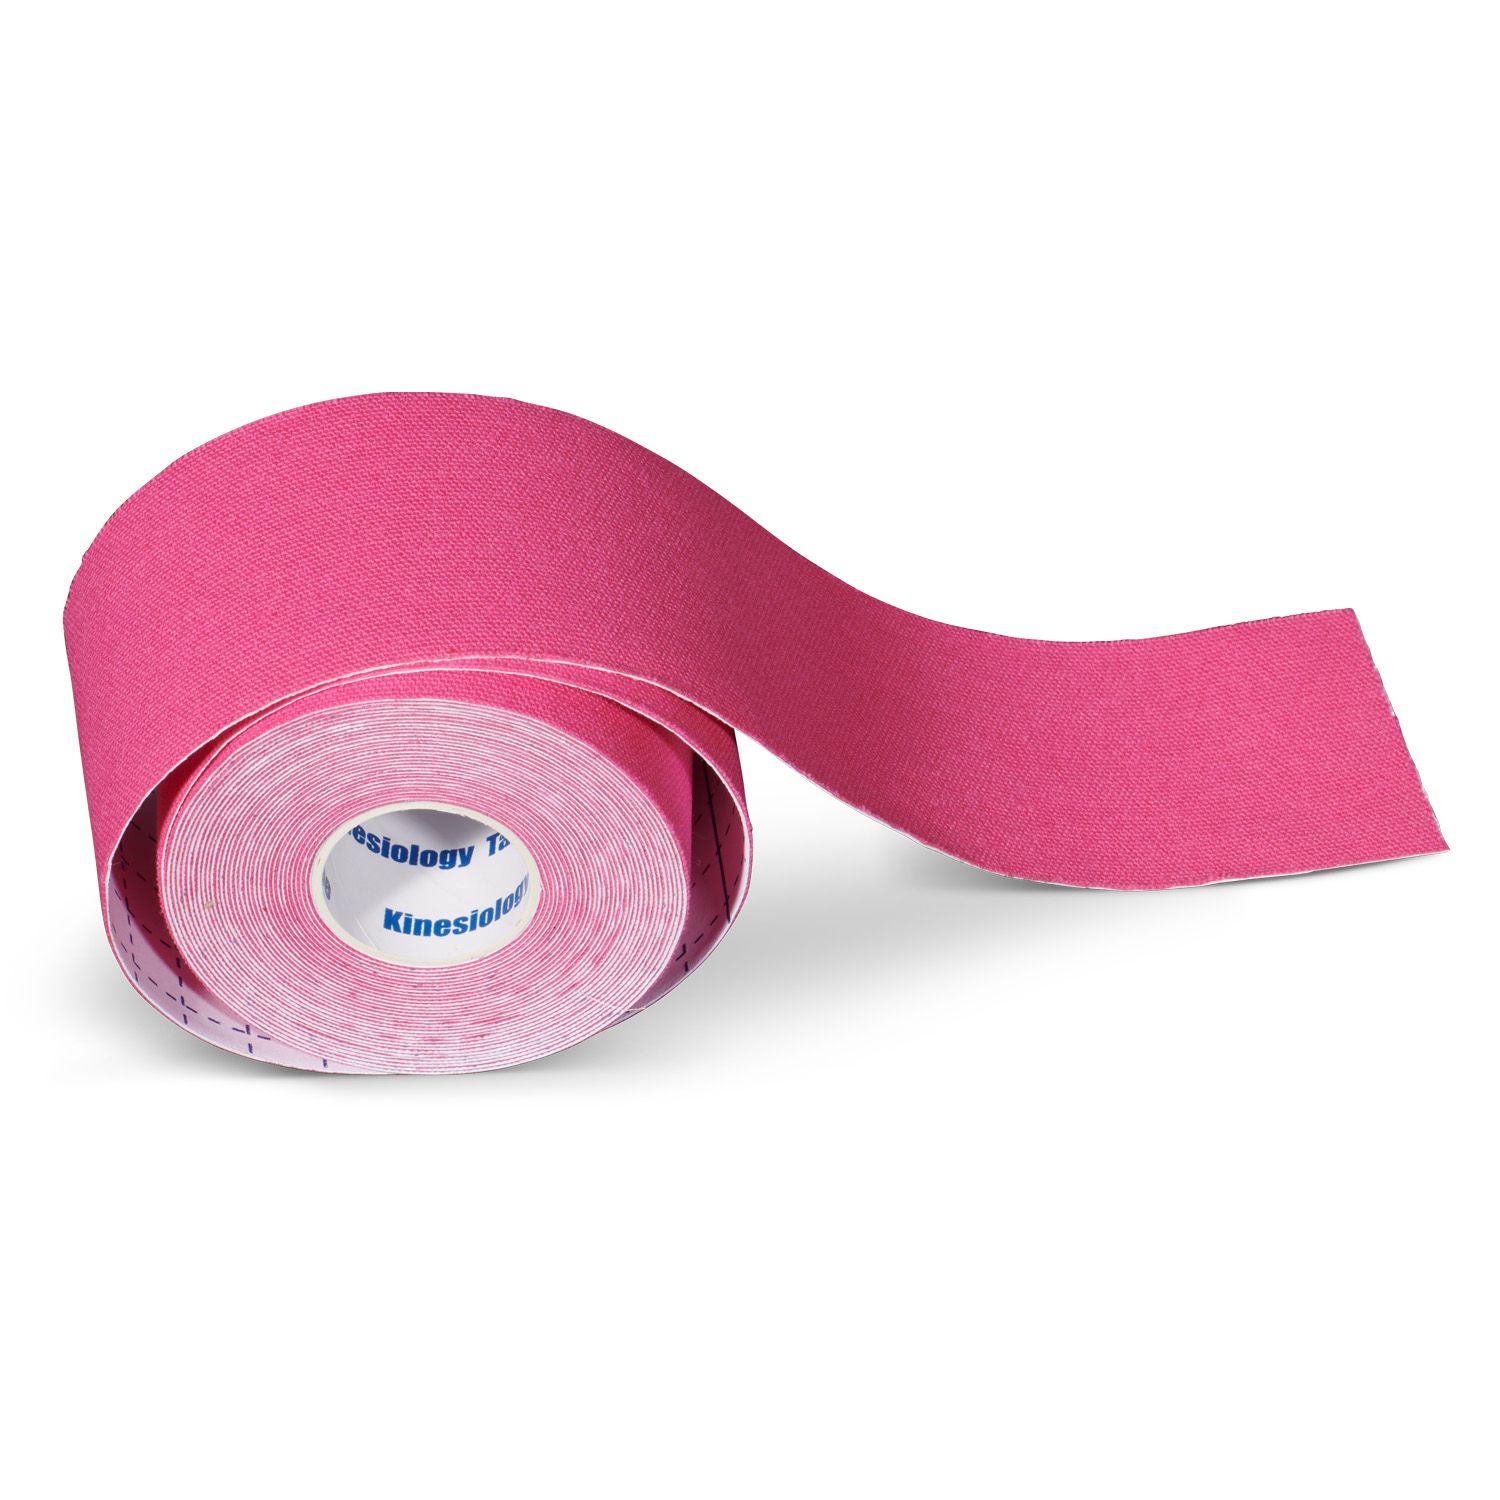 Kinesiology tape 12 rolls plus 3 rolls for free pink